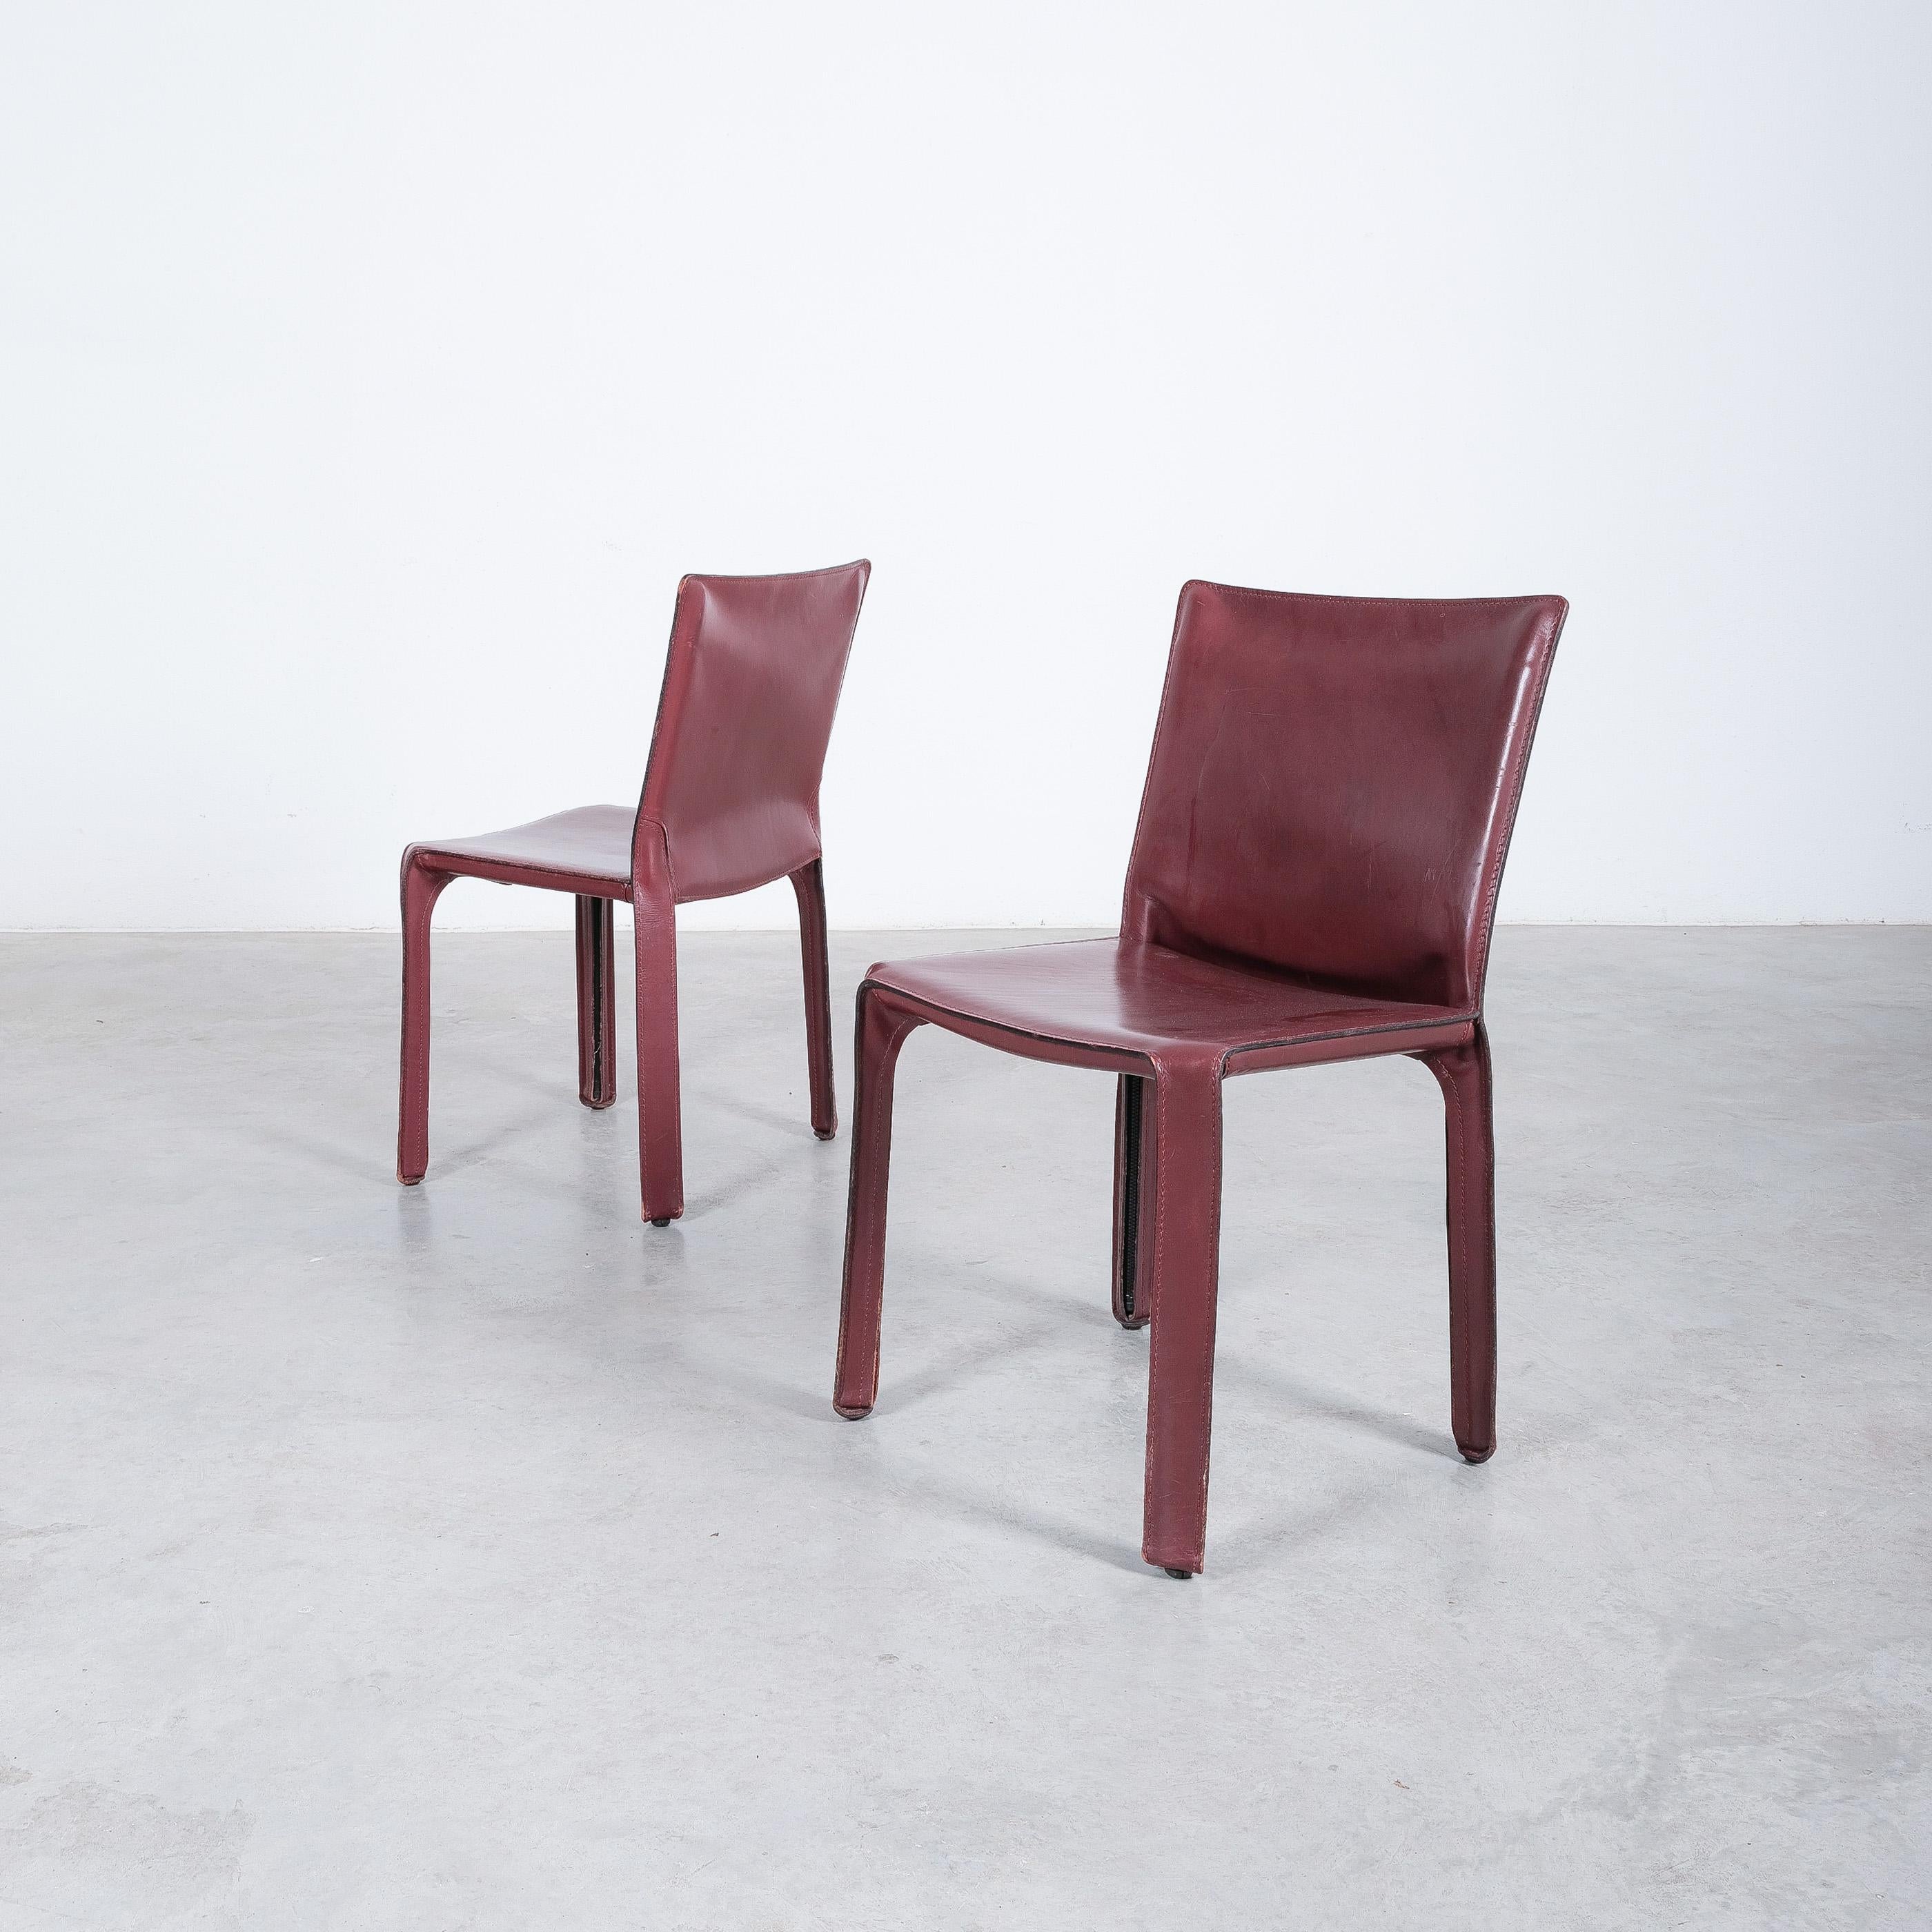 Mario Bellini Cassina Cab 412, 413 Set of Ten 9 Red Leather Dining Chairs 10